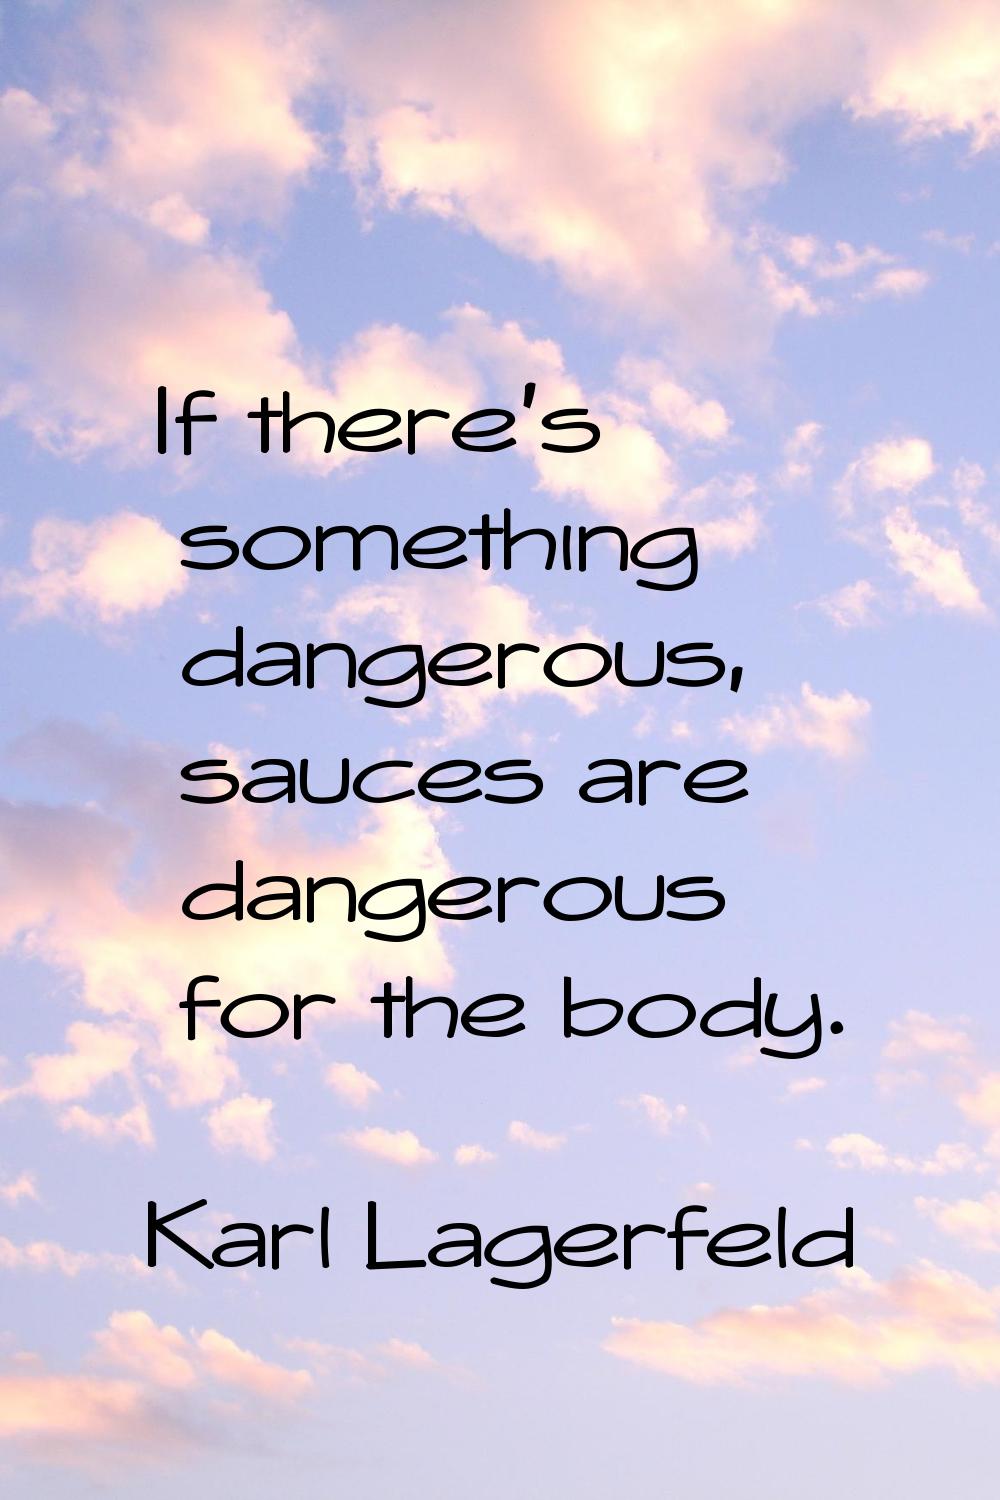 If there's something dangerous, sauces are dangerous for the body.